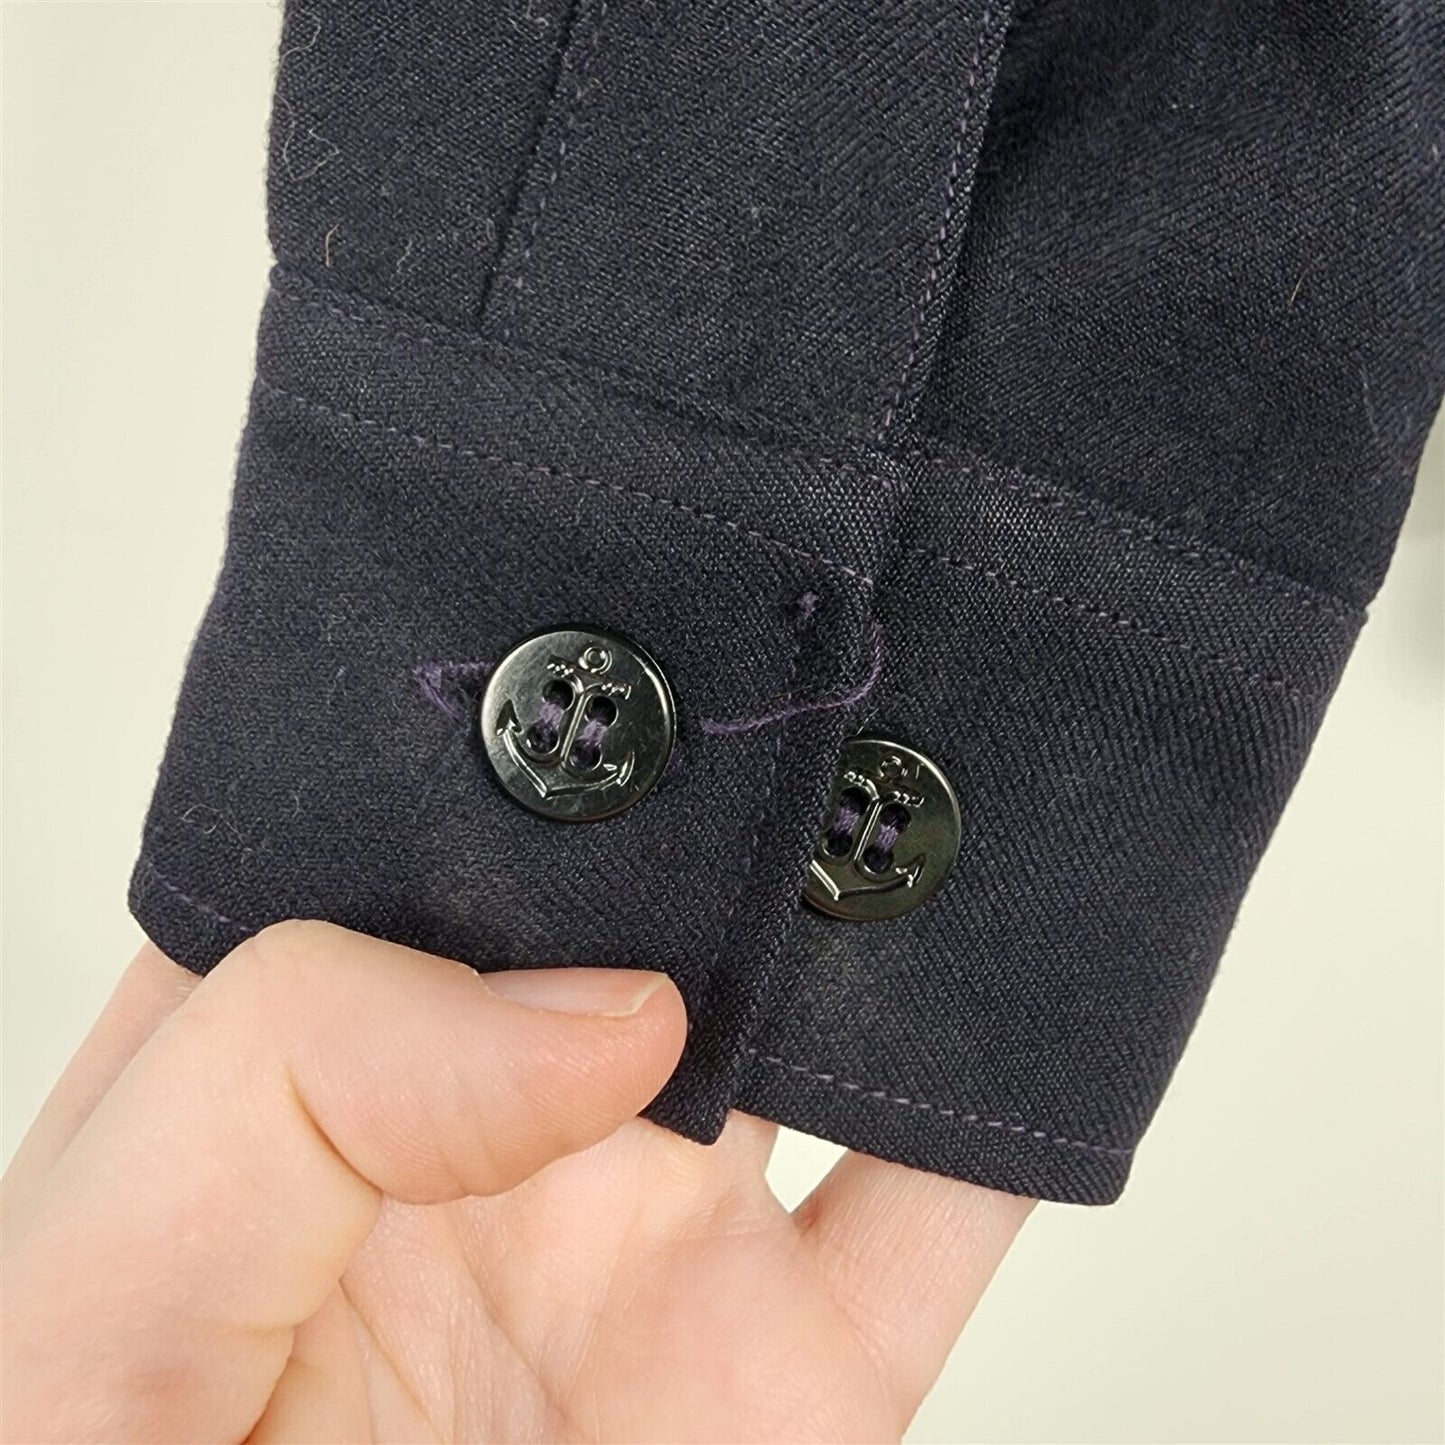 Vintage US Navy Military Martin Mfg Anchor Buttons Blue Wool Flannel Shirt 14x33